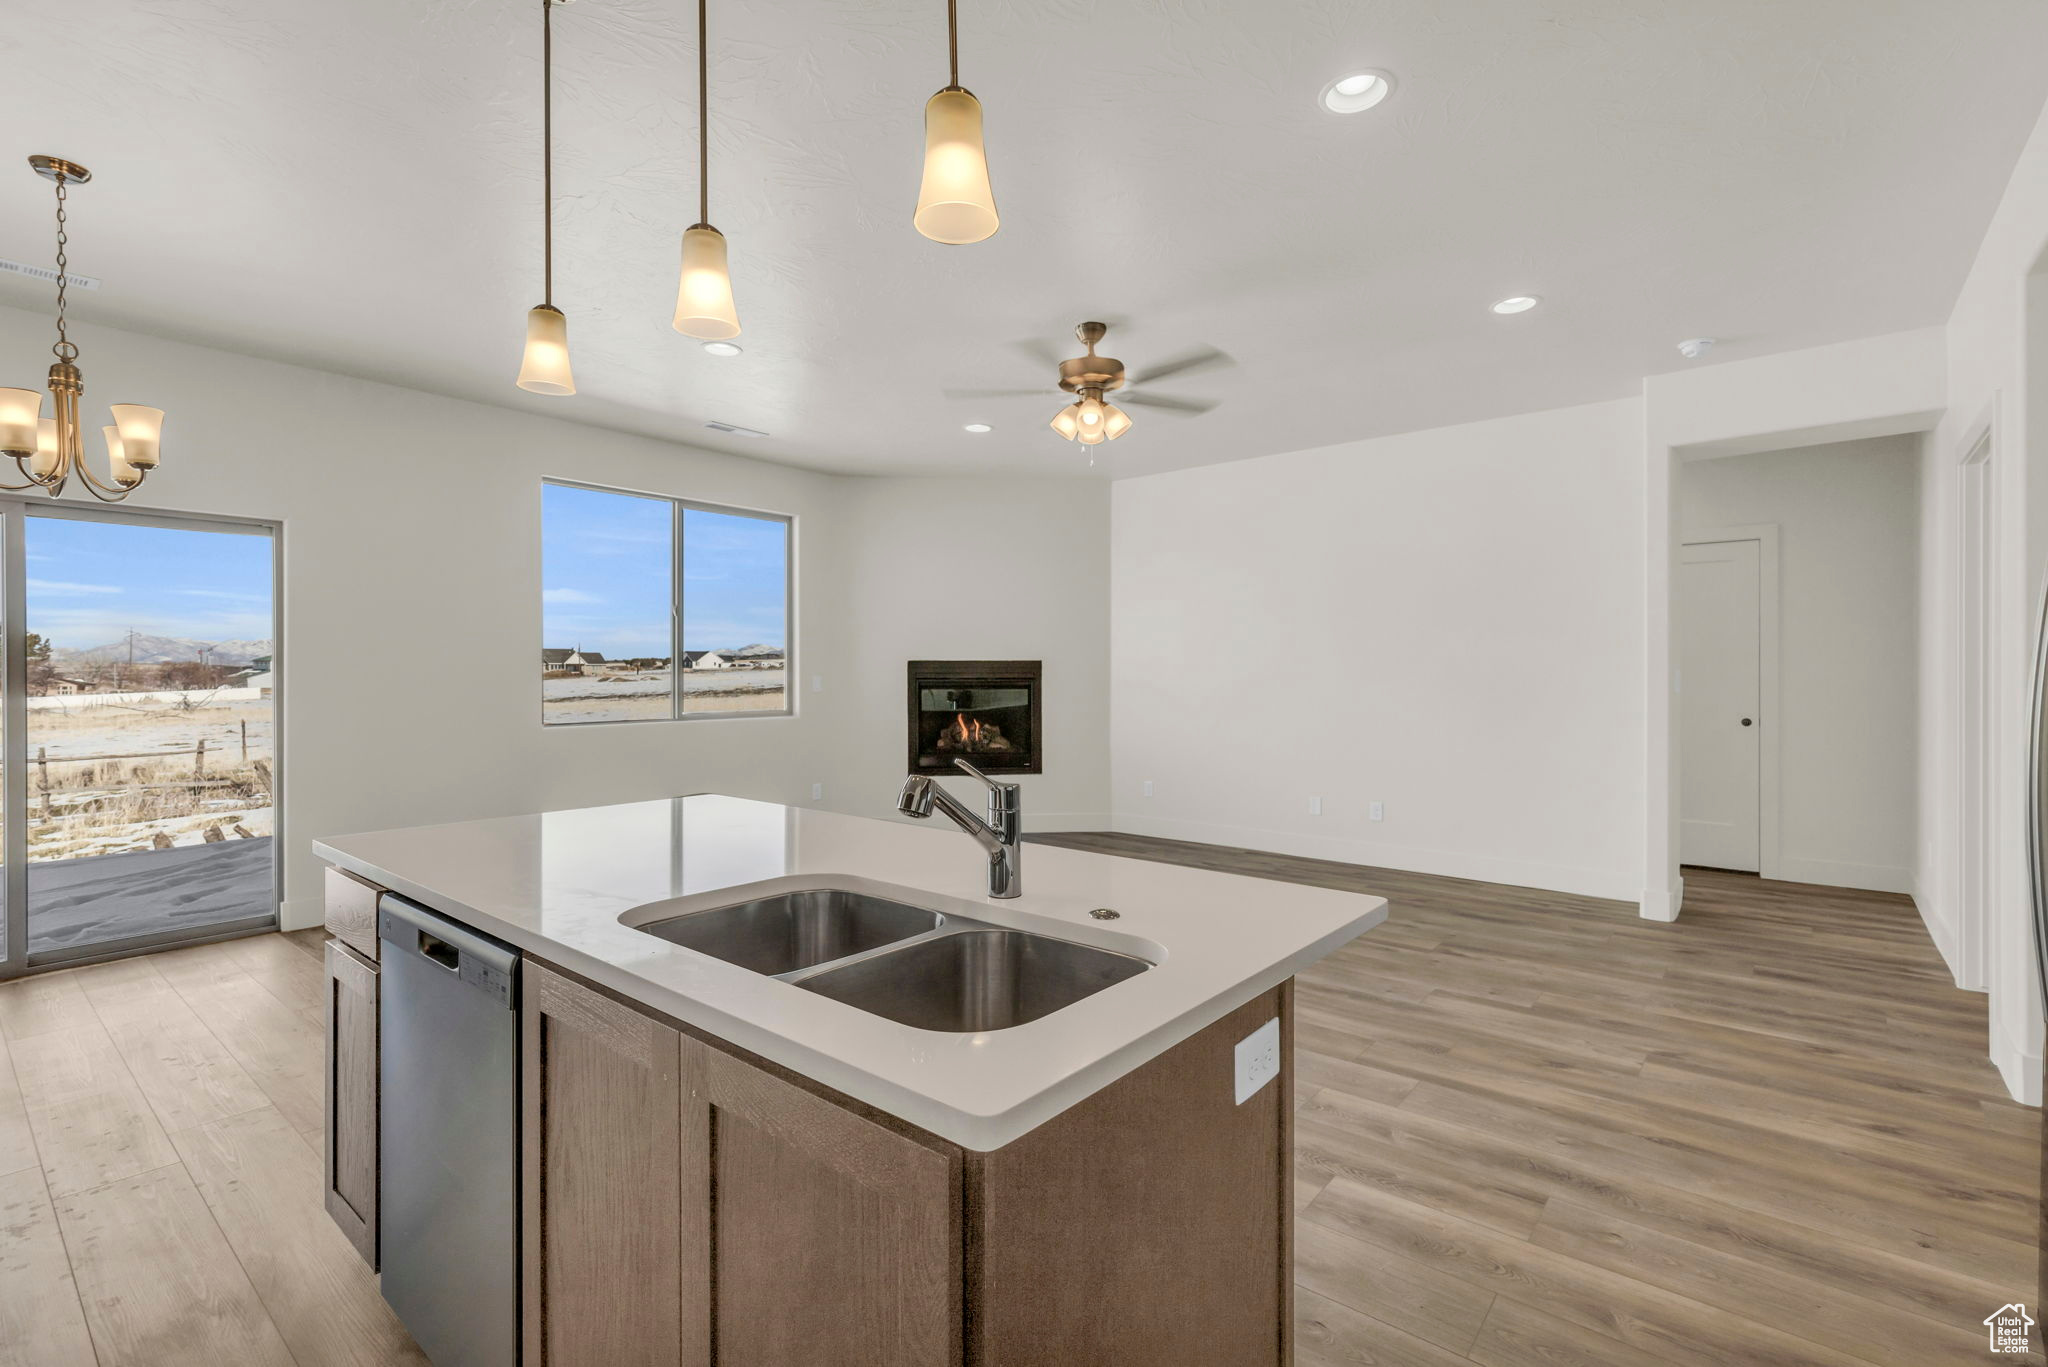 Kitchen with light hardwood / wood-style flooring, dishwasher, a kitchen island with sink, ceiling fan with notable chandelier, and sink